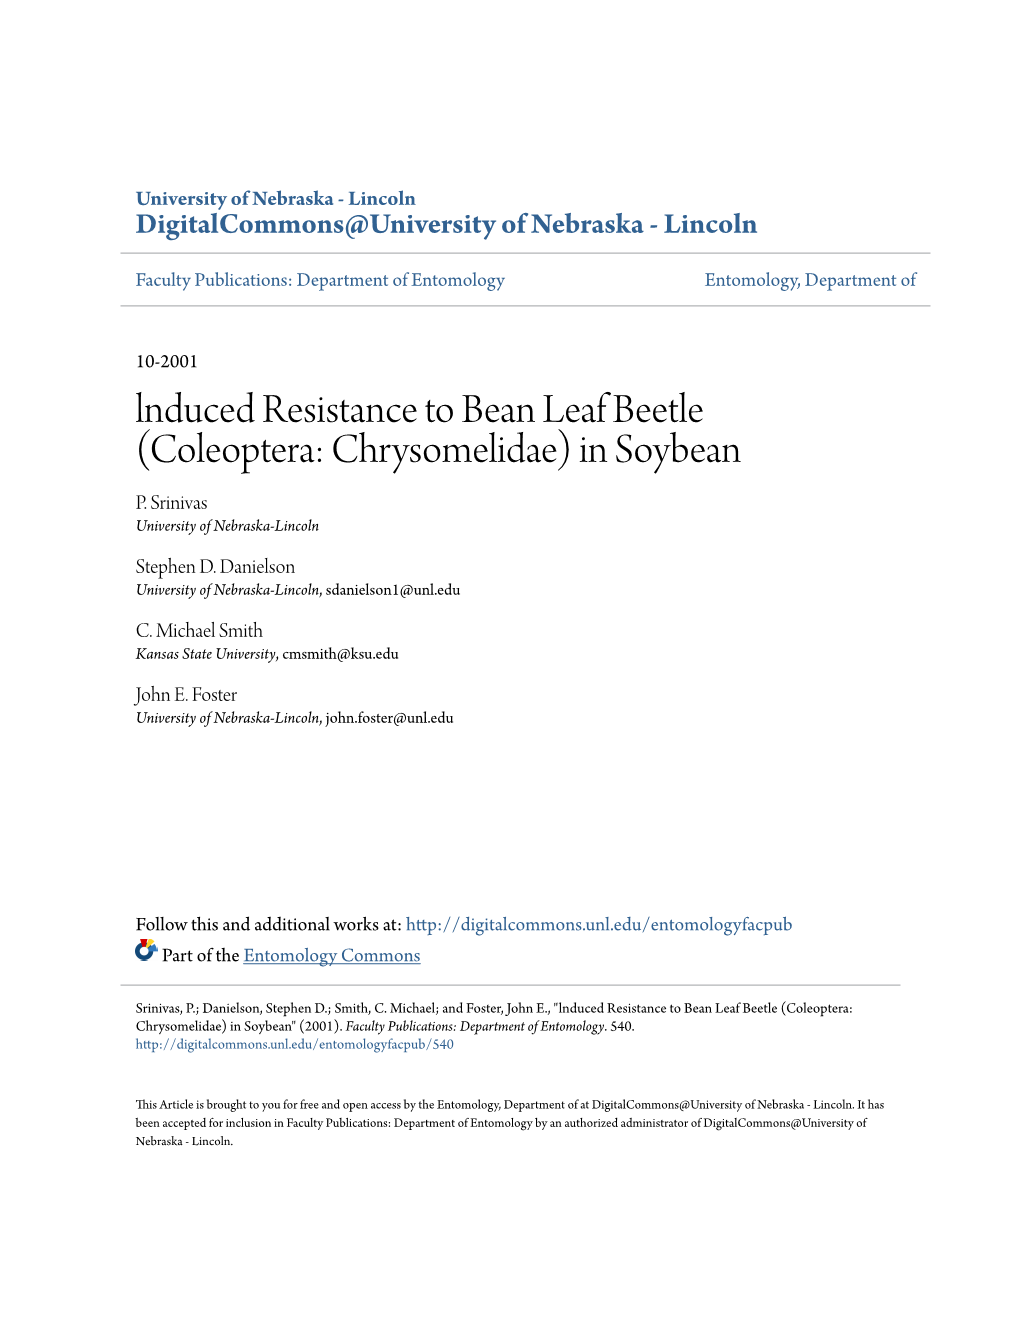 Lnduced Resistance to Bean Leaf Beetle (Coleoptera: Chrysomelidae) in Soybean P